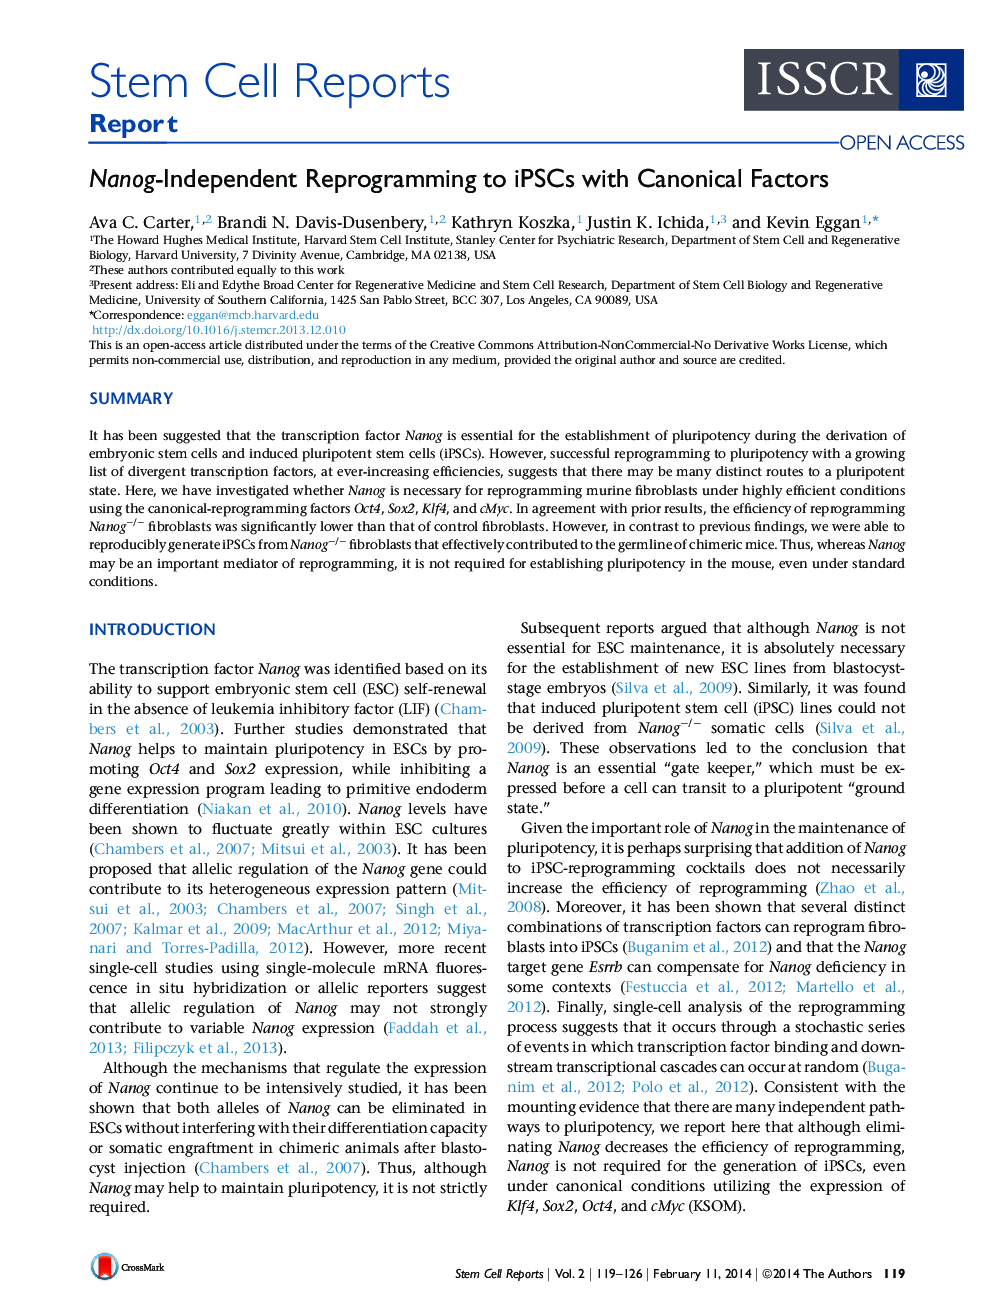 Nanog-Independent Reprogramming to iPSCs with Canonical Factors 